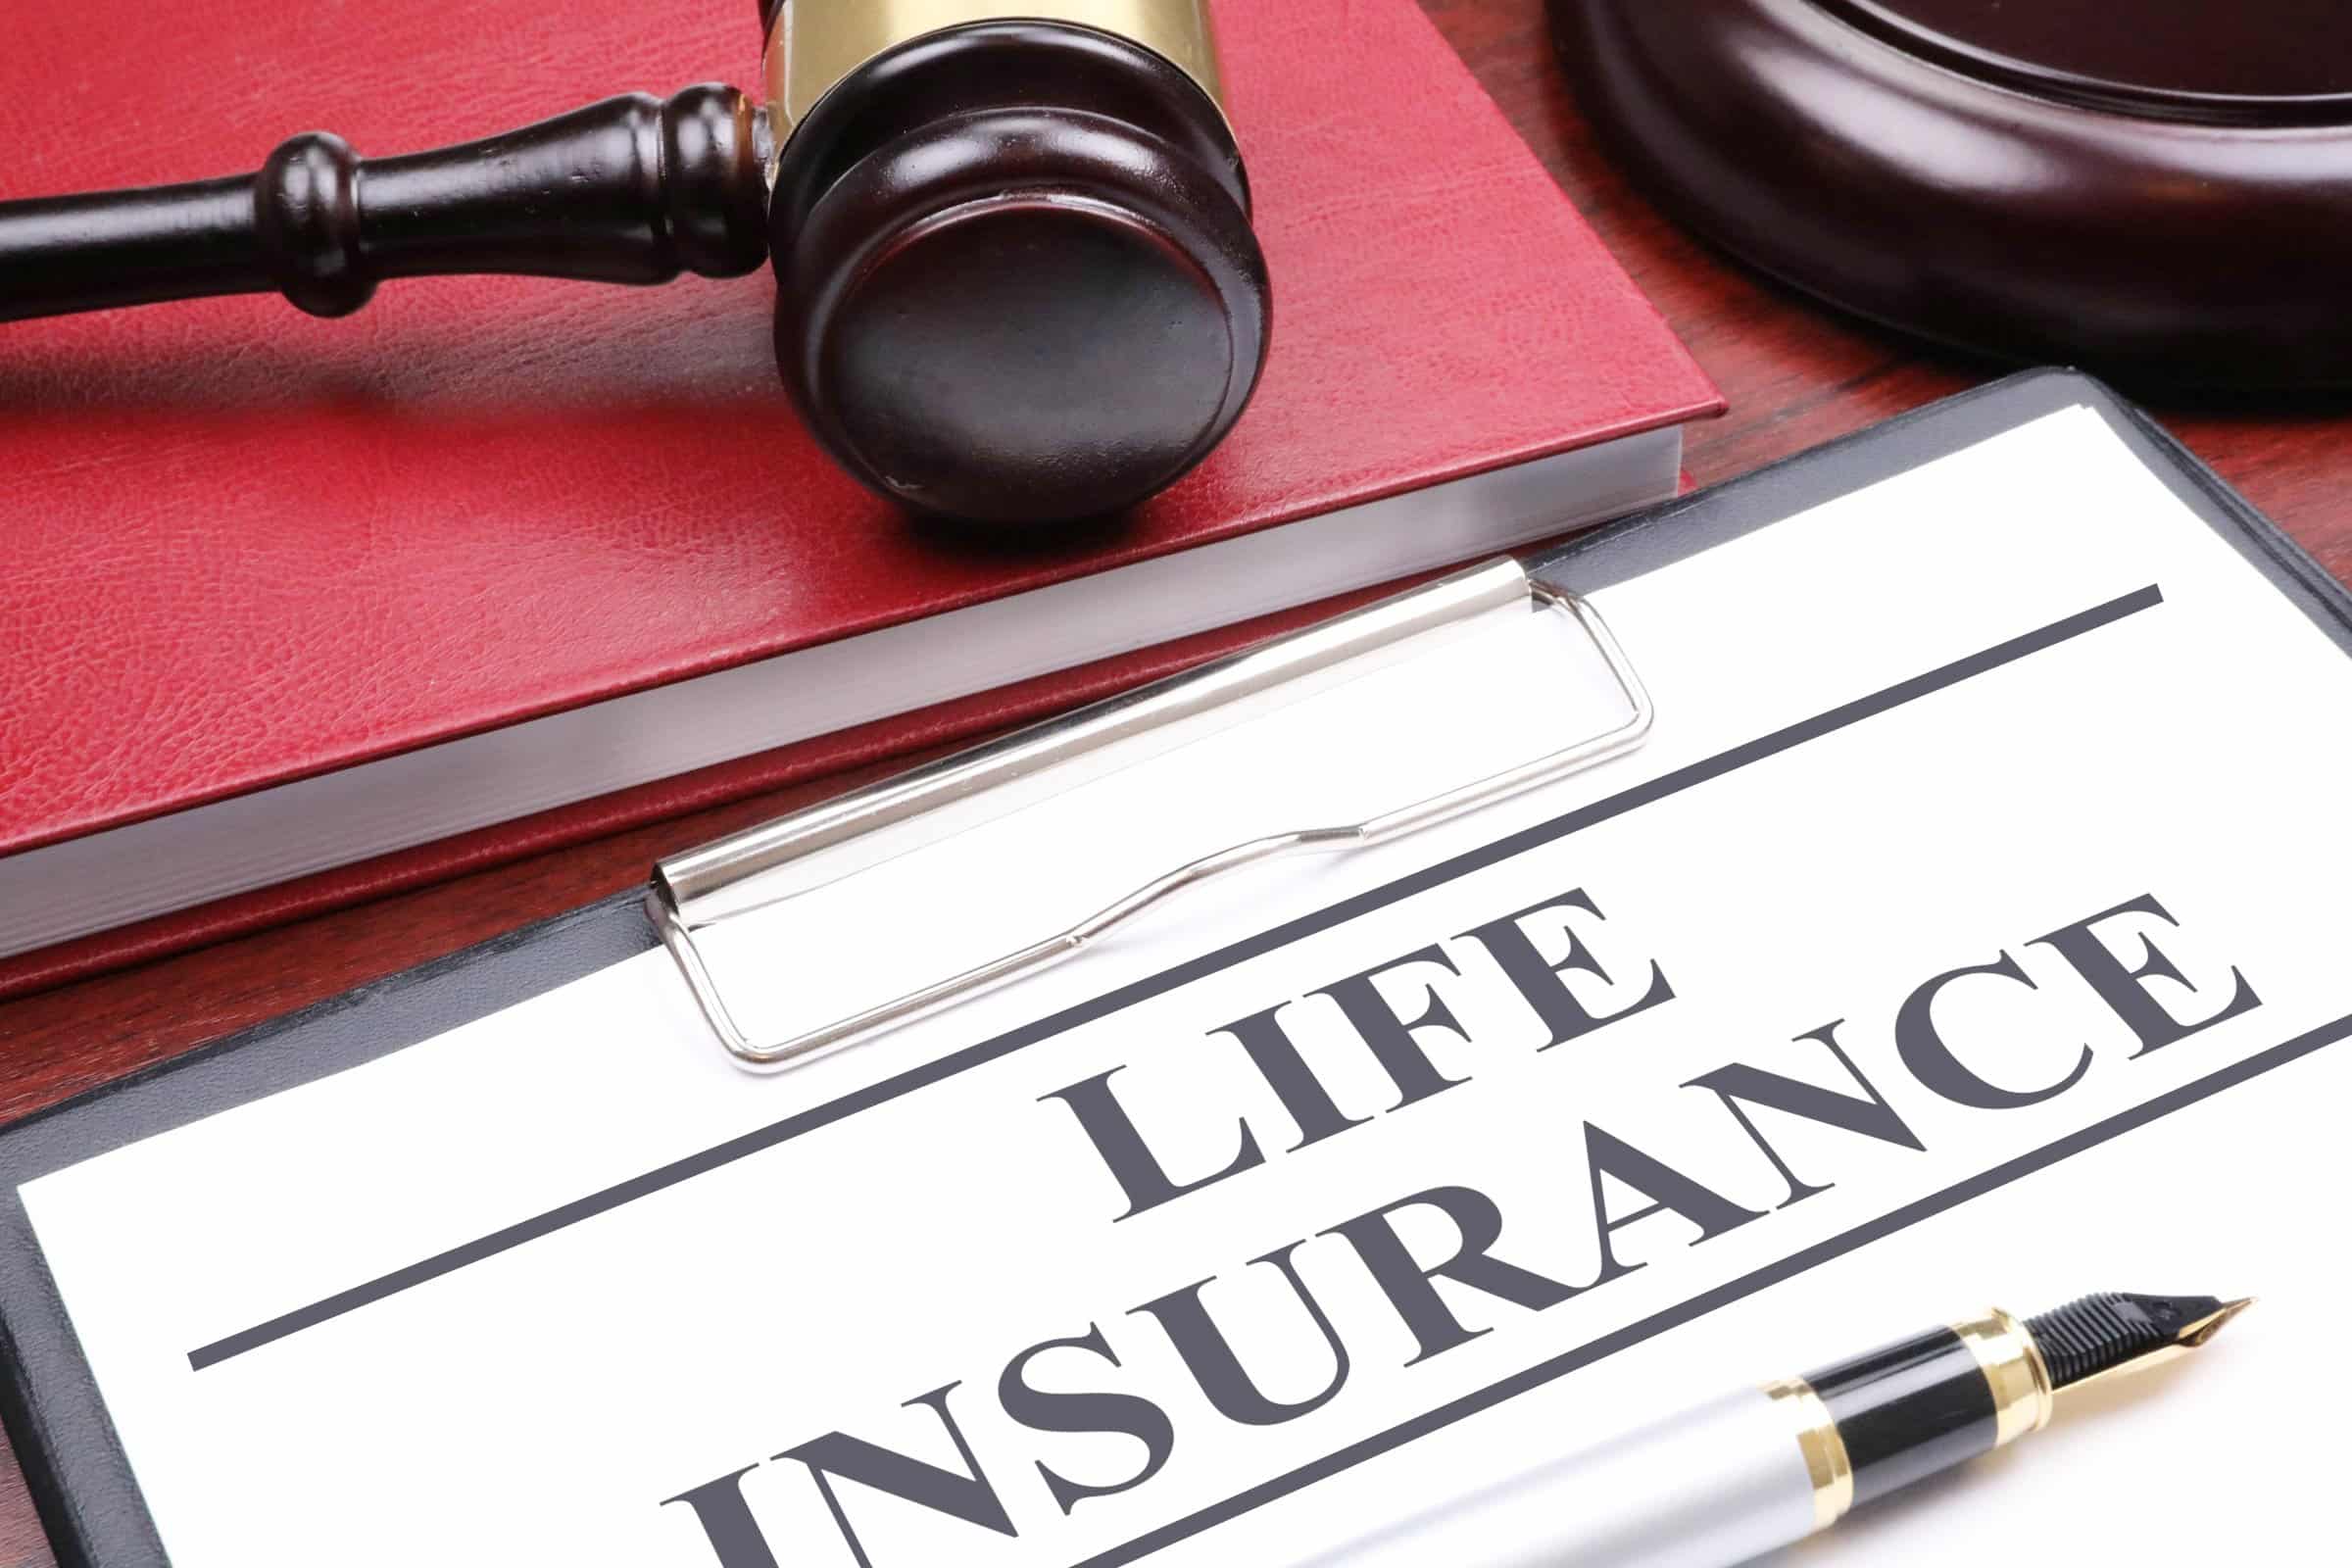 Integrating its SCPI shares into a life insurance contract, good or bad idea?